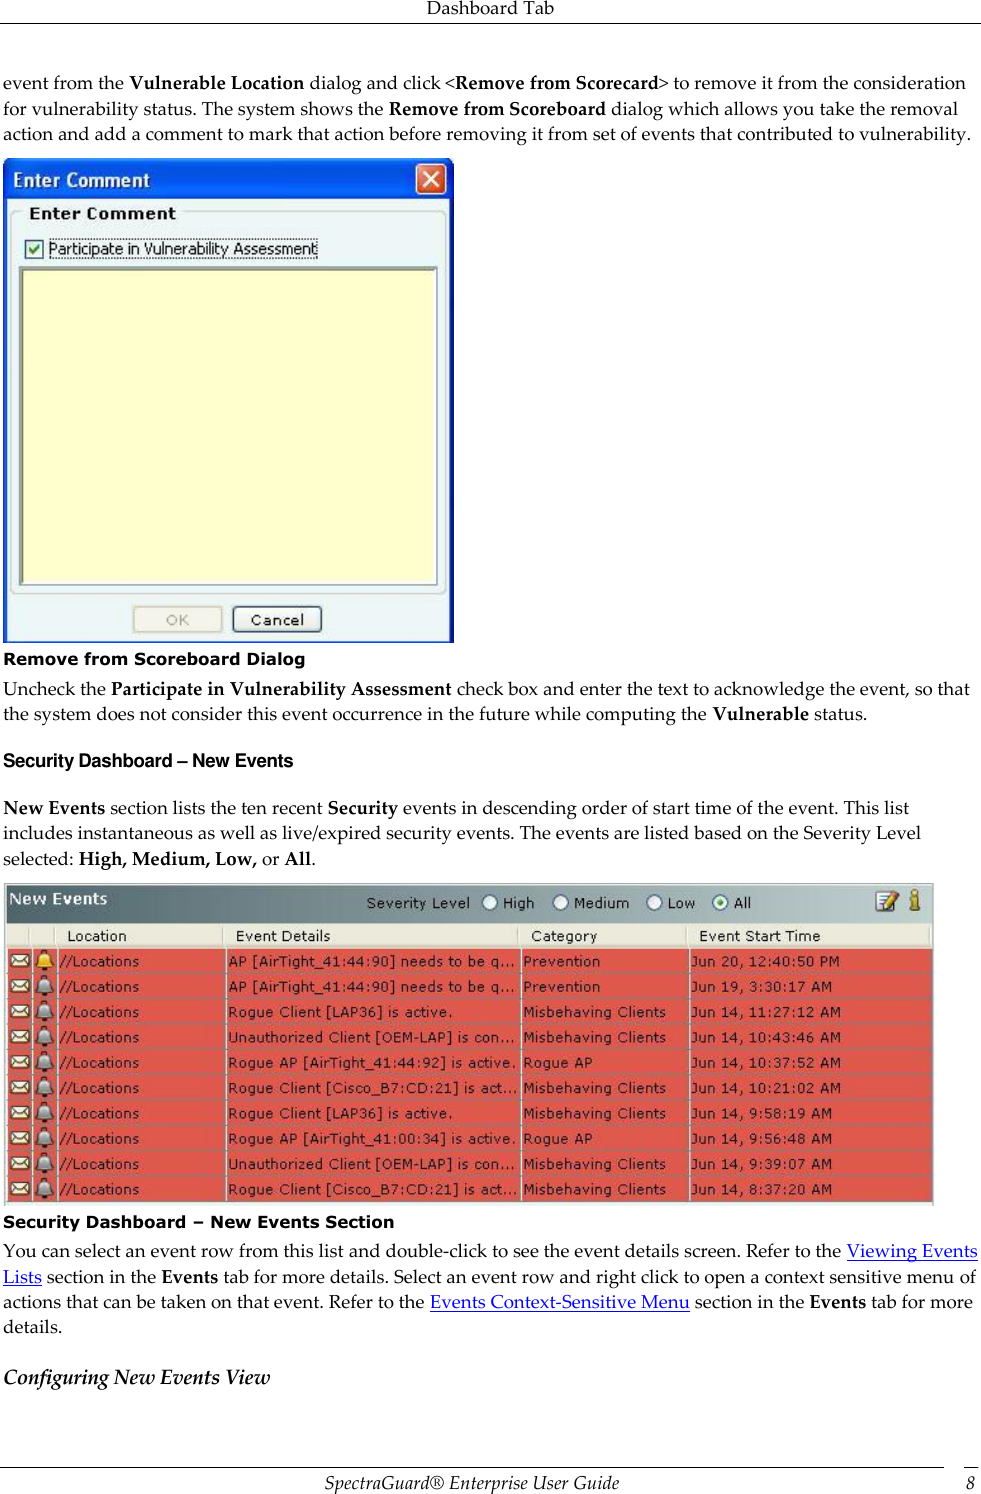 Dashboard Tab SpectraGuard®  Enterprise User Guide 8 event from the Vulnerable Location dialog and click &lt;Remove from Scorecard&gt; to remove it from the consideration for vulnerability status. The system shows the Remove from Scoreboard dialog which allows you take the removal action and add a comment to mark that action before removing it from set of events that contributed to vulnerability.  Remove from Scoreboard Dialog Uncheck the Participate in Vulnerability Assessment check box and enter the text to acknowledge the event, so that the system does not consider this event occurrence in the future while computing the Vulnerable status. Security Dashboard – New Events New Events section lists the ten recent Security events in descending order of start time of the event. This list includes instantaneous as well as live/expired security events. The events are listed based on the Severity Level selected: High, Medium, Low, or All.  Security Dashboard – New Events Section You can select an event row from this list and double-click to see the event details screen. Refer to the Viewing Events Lists section in the Events tab for more details. Select an event row and right click to open a context sensitive menu of actions that can be taken on that event. Refer to the Events Context-Sensitive Menu section in the Events tab for more details. Configuring New Events View 